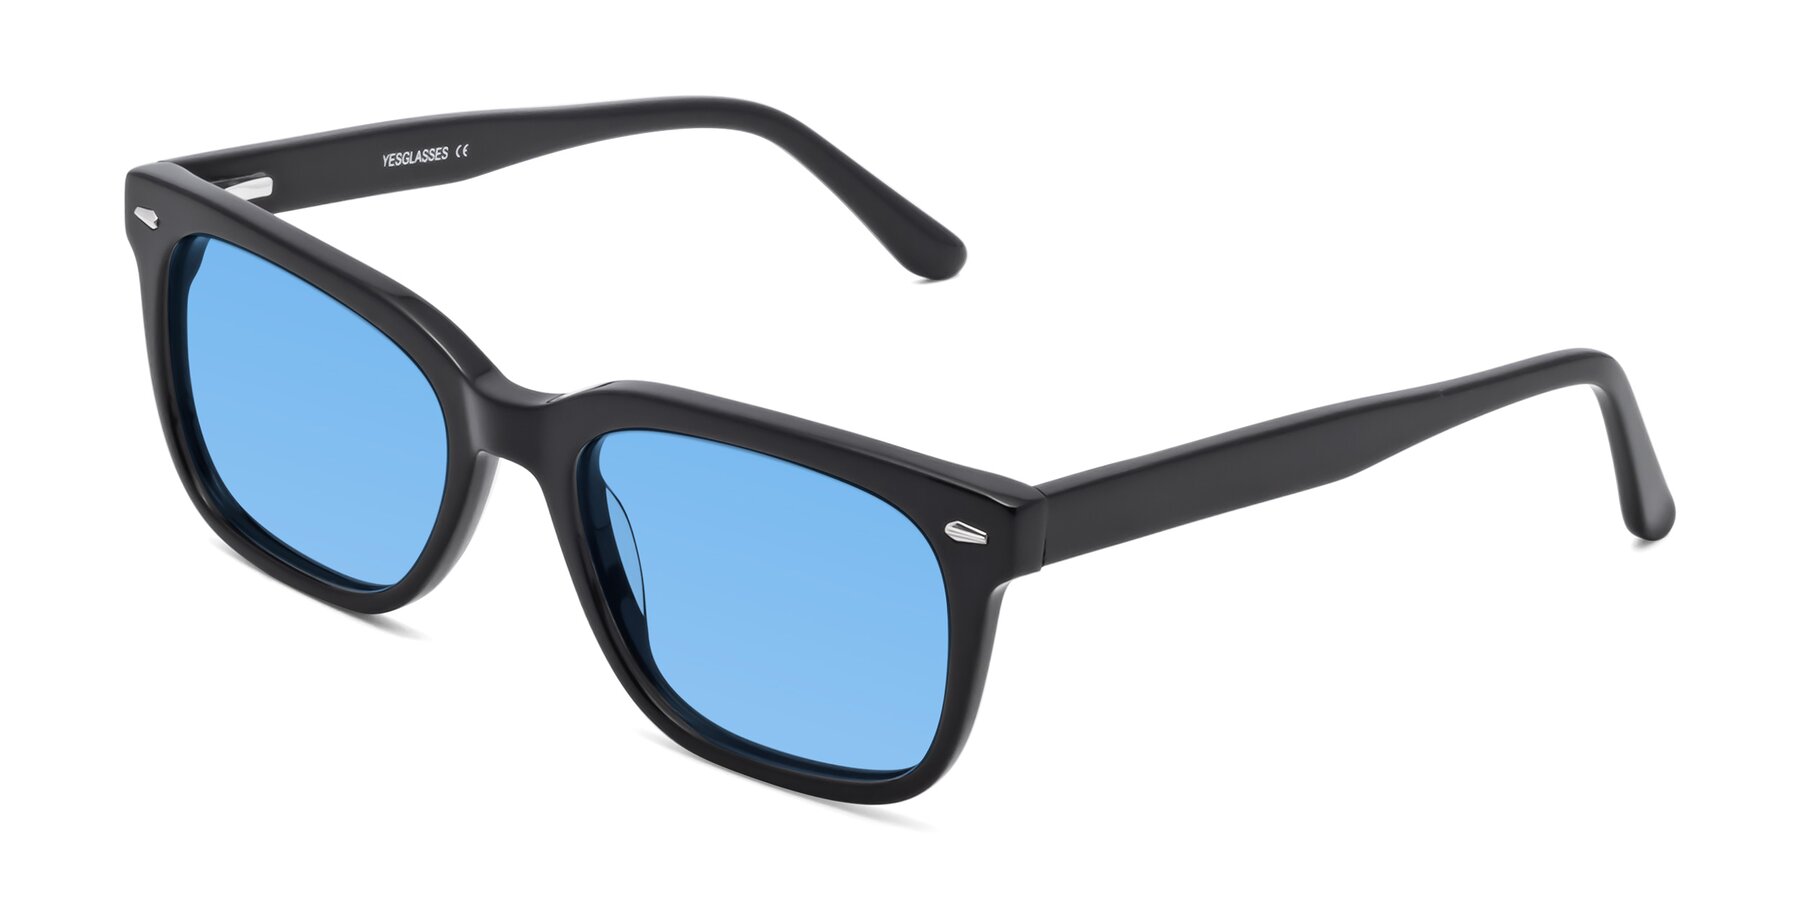 Angle of 1052 in Black with Medium Blue Tinted Lenses